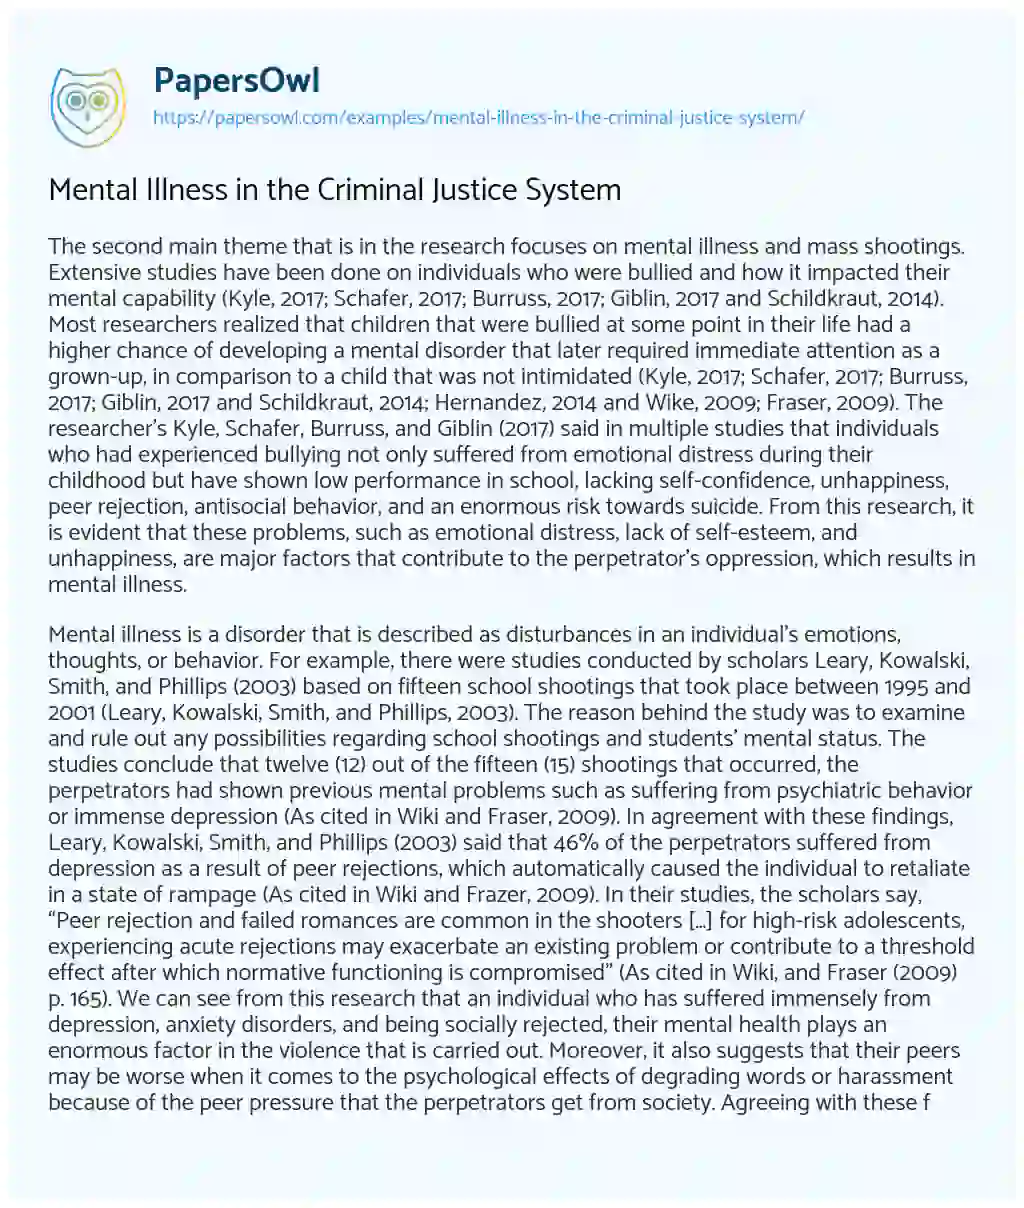 Essay on Mental Illness in the Criminal Justice System